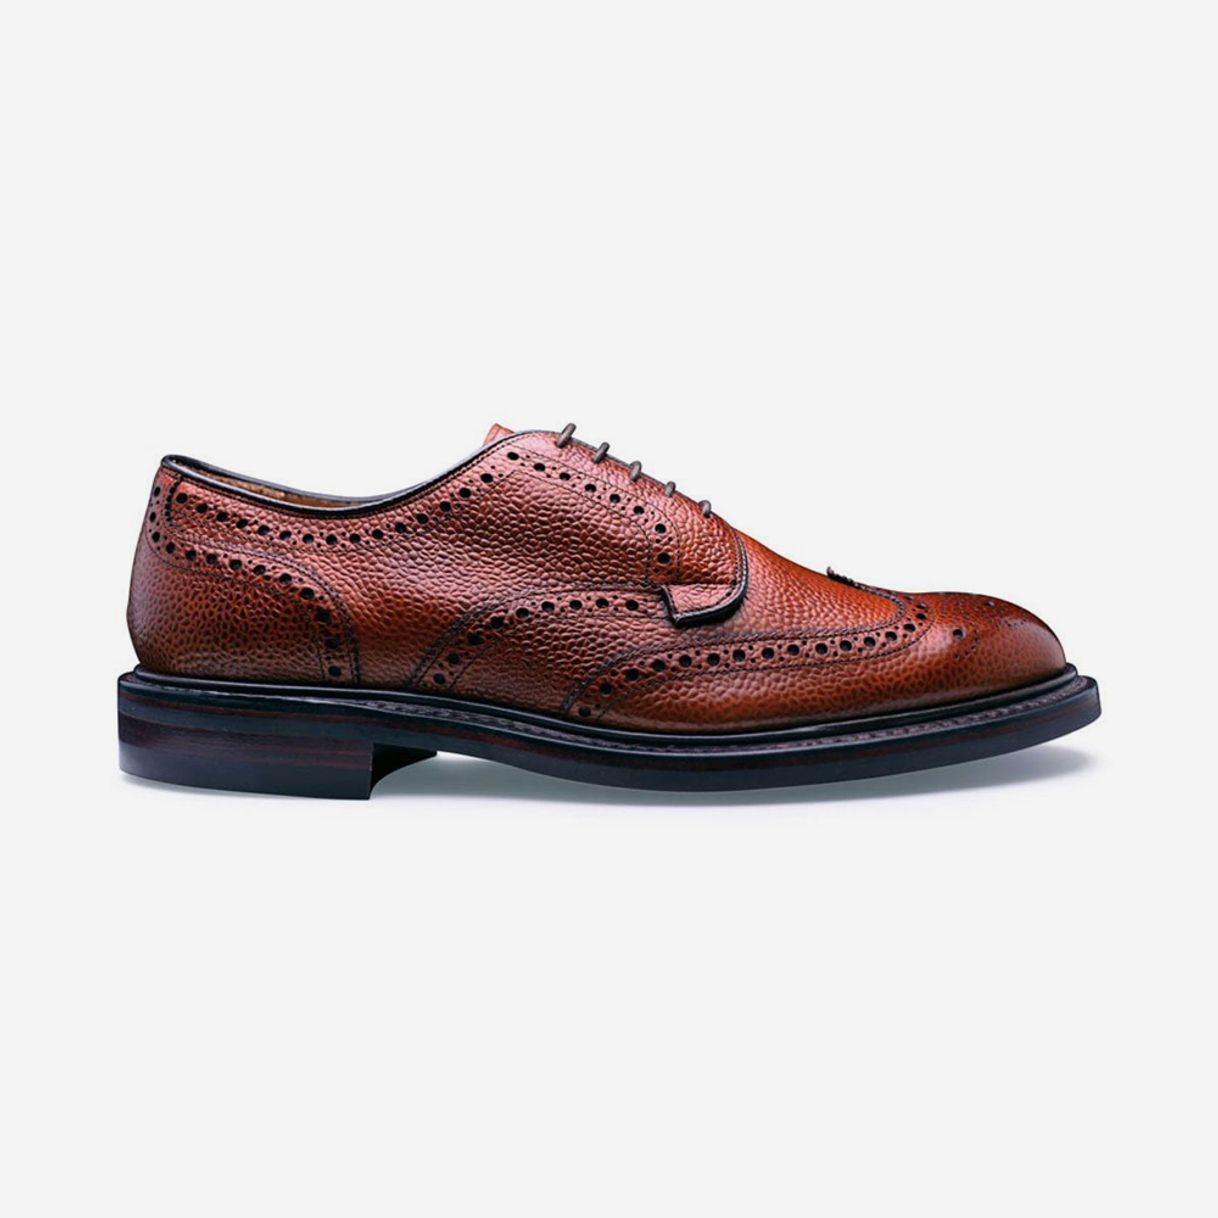 Cheaney ‘Bexhill II R’ Derby Brogues